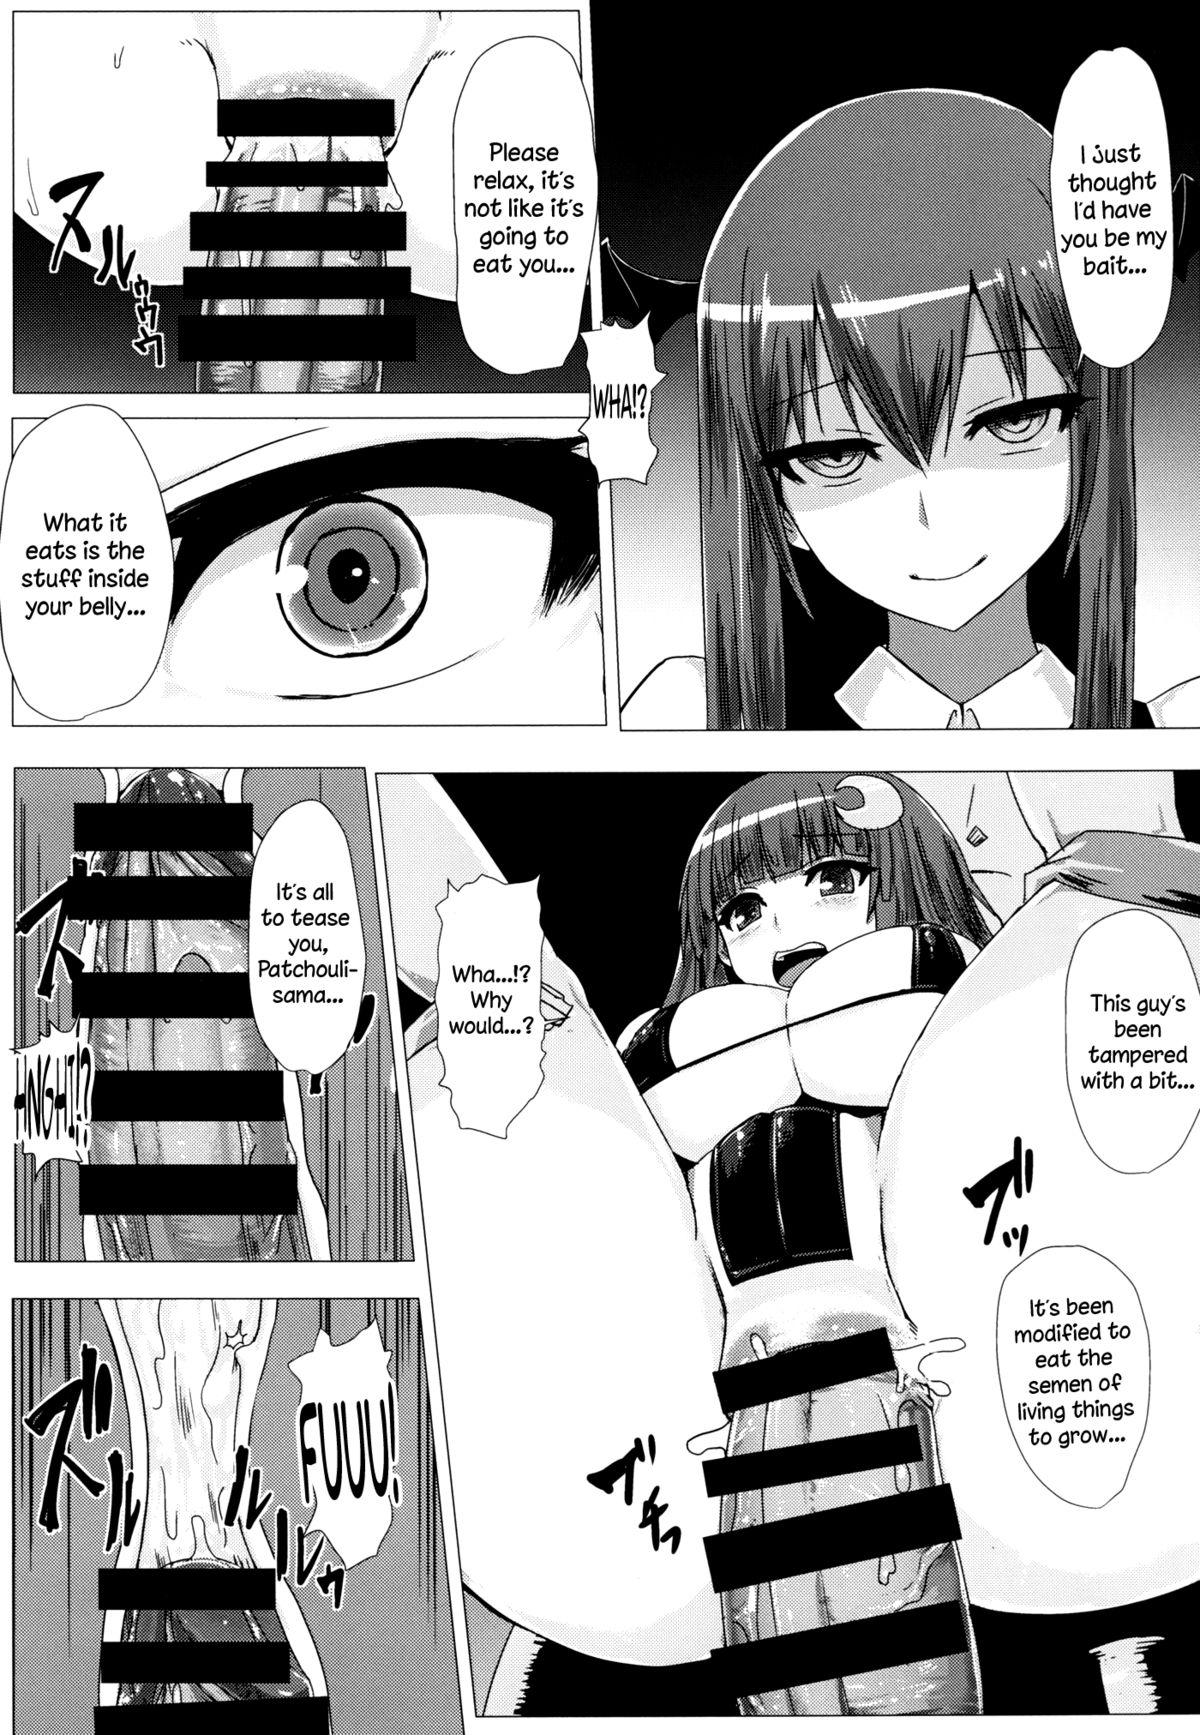 Village Shiri Pache Pache | Ass Patchy Patchy - Touhou project Sex - Page 10